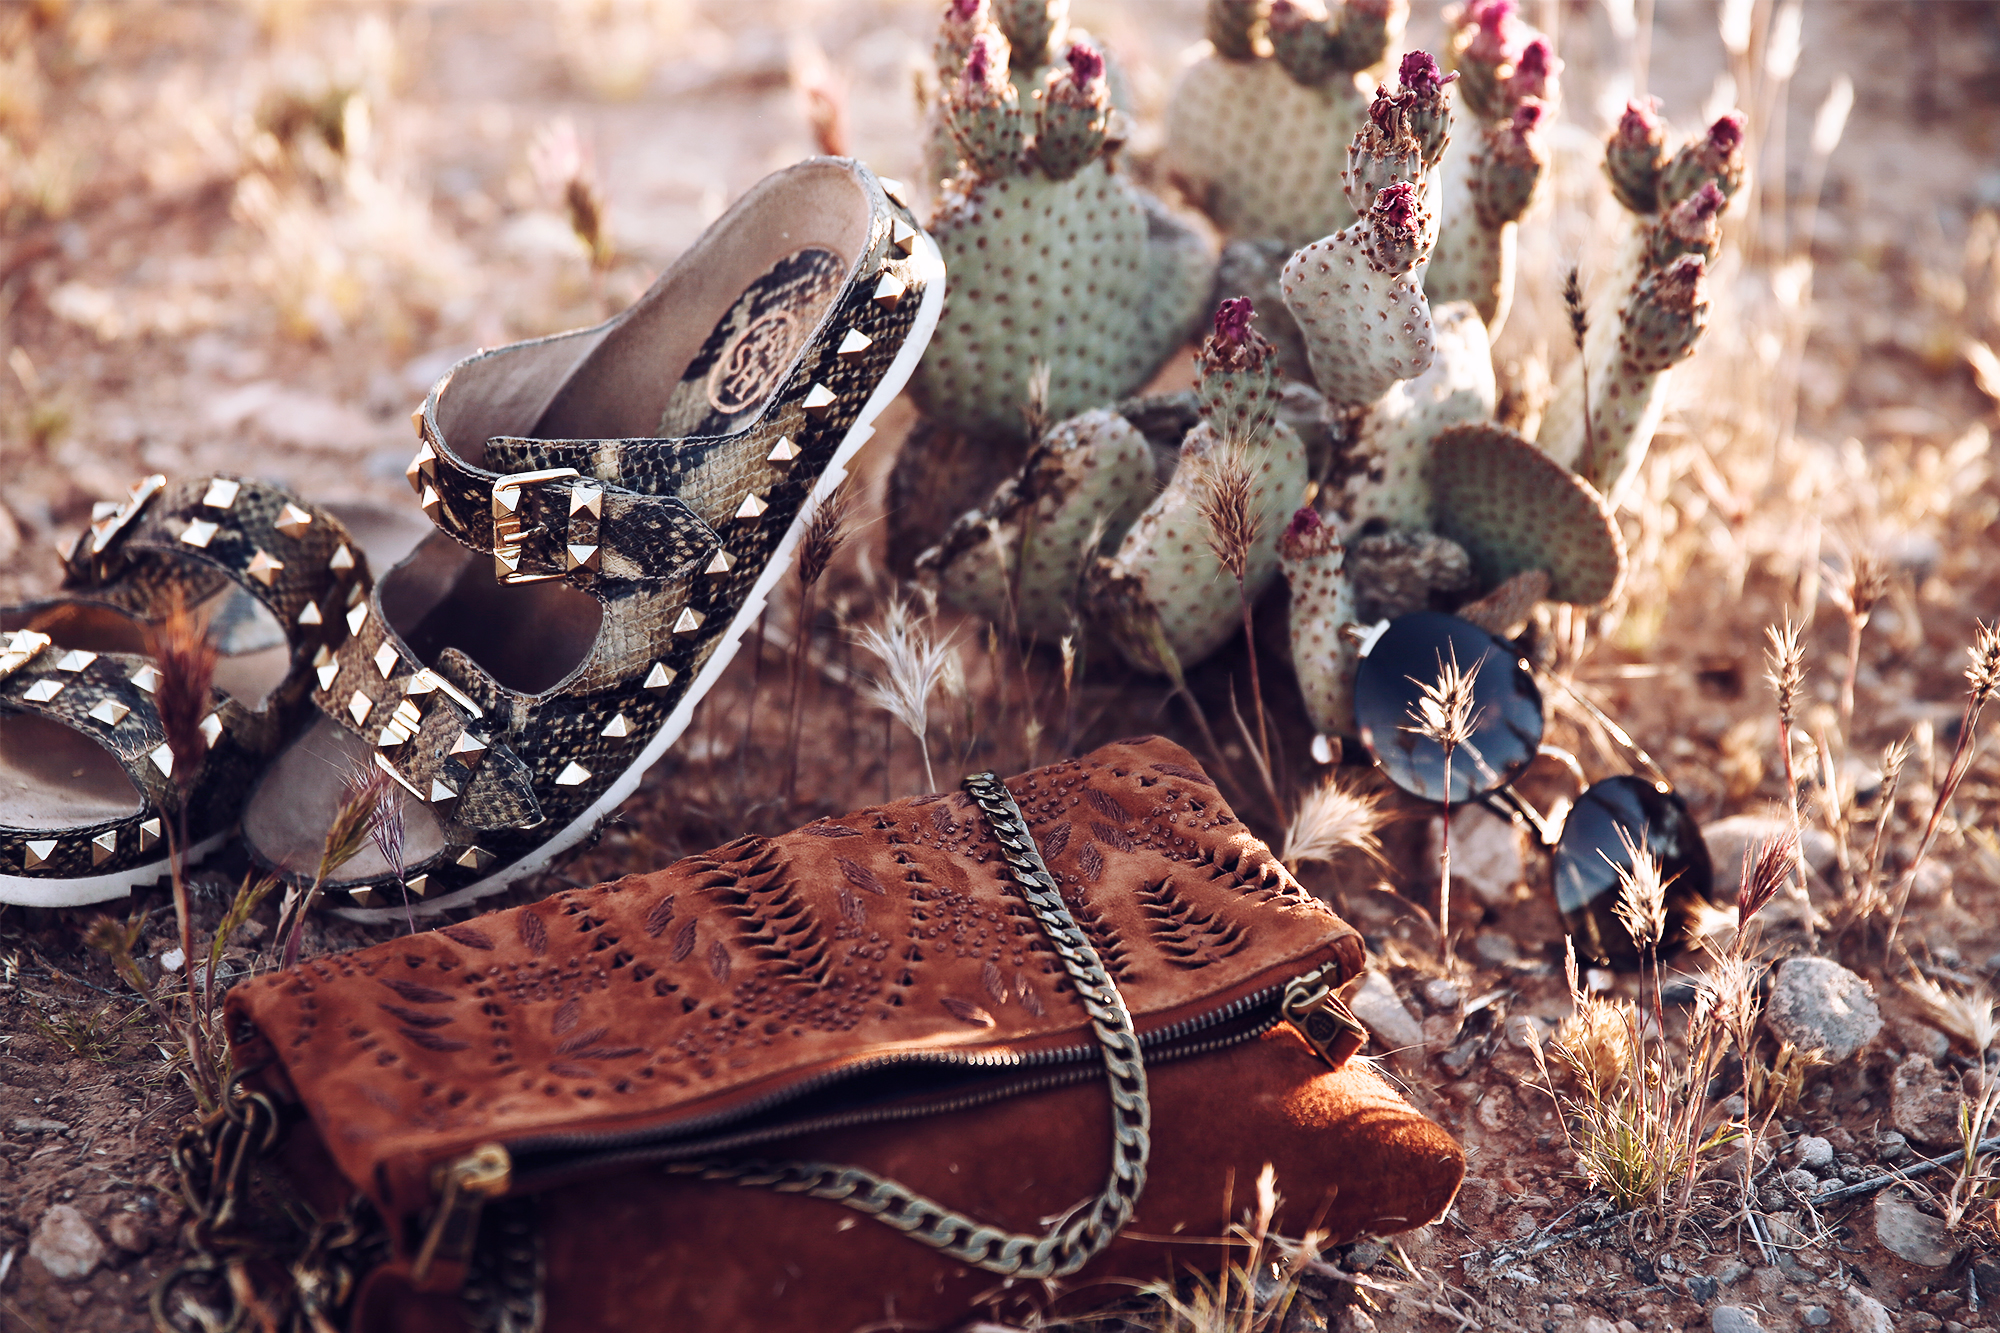 Safari style meets Boho | view more pictures on my blog | in the desert of California | Coachella | Fashion | outfit | summer